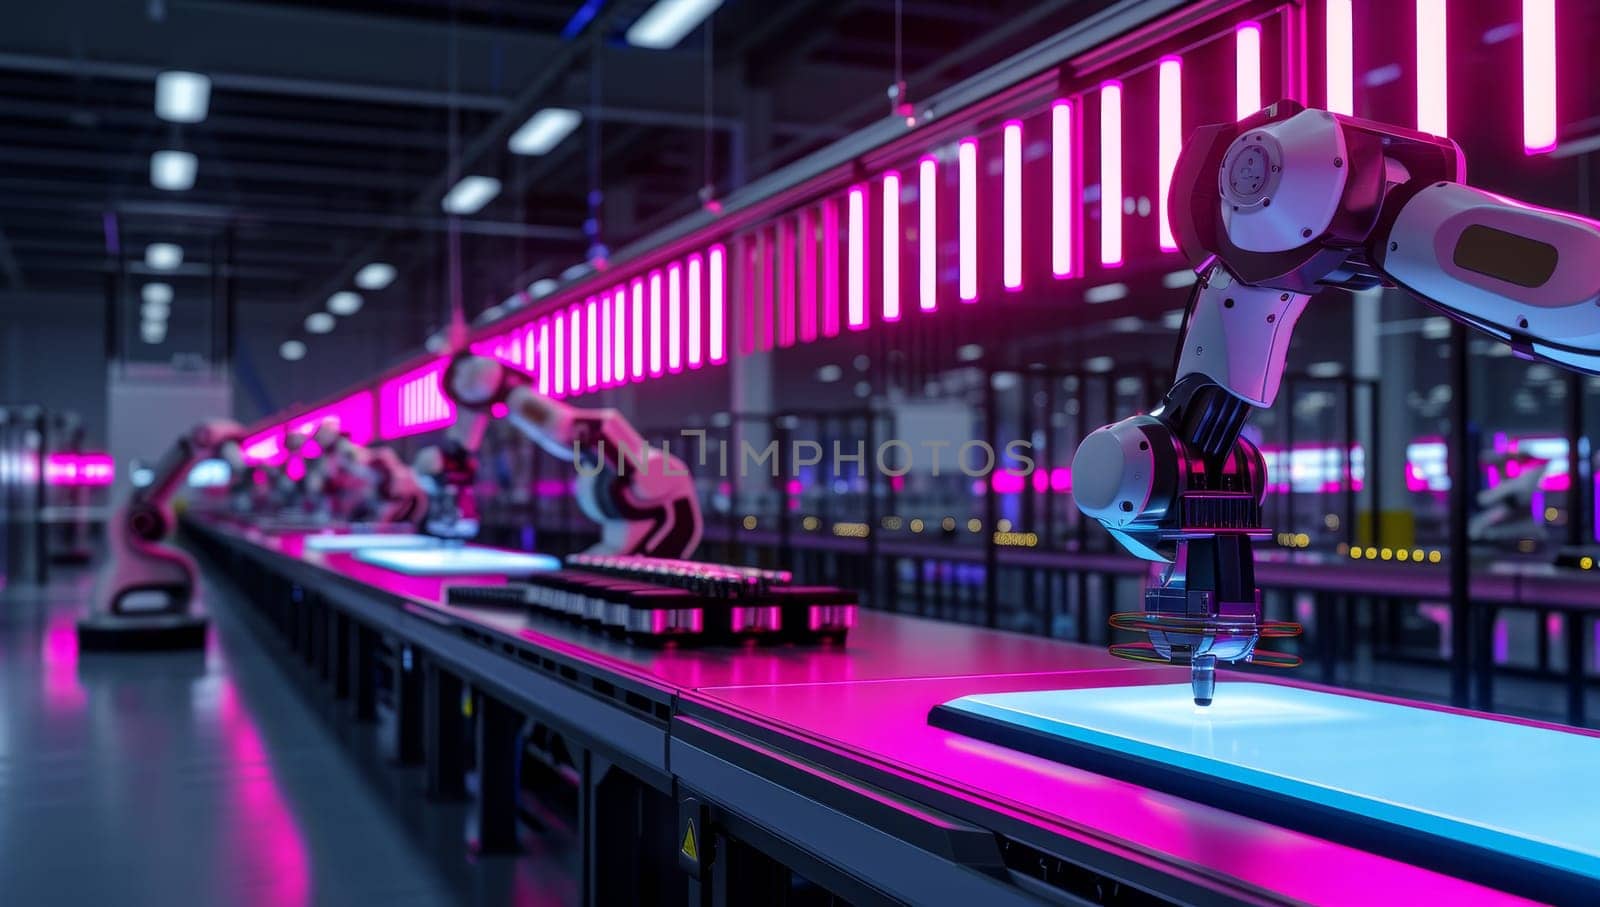 Robotic arms work efficiently in a neon lit modern factory